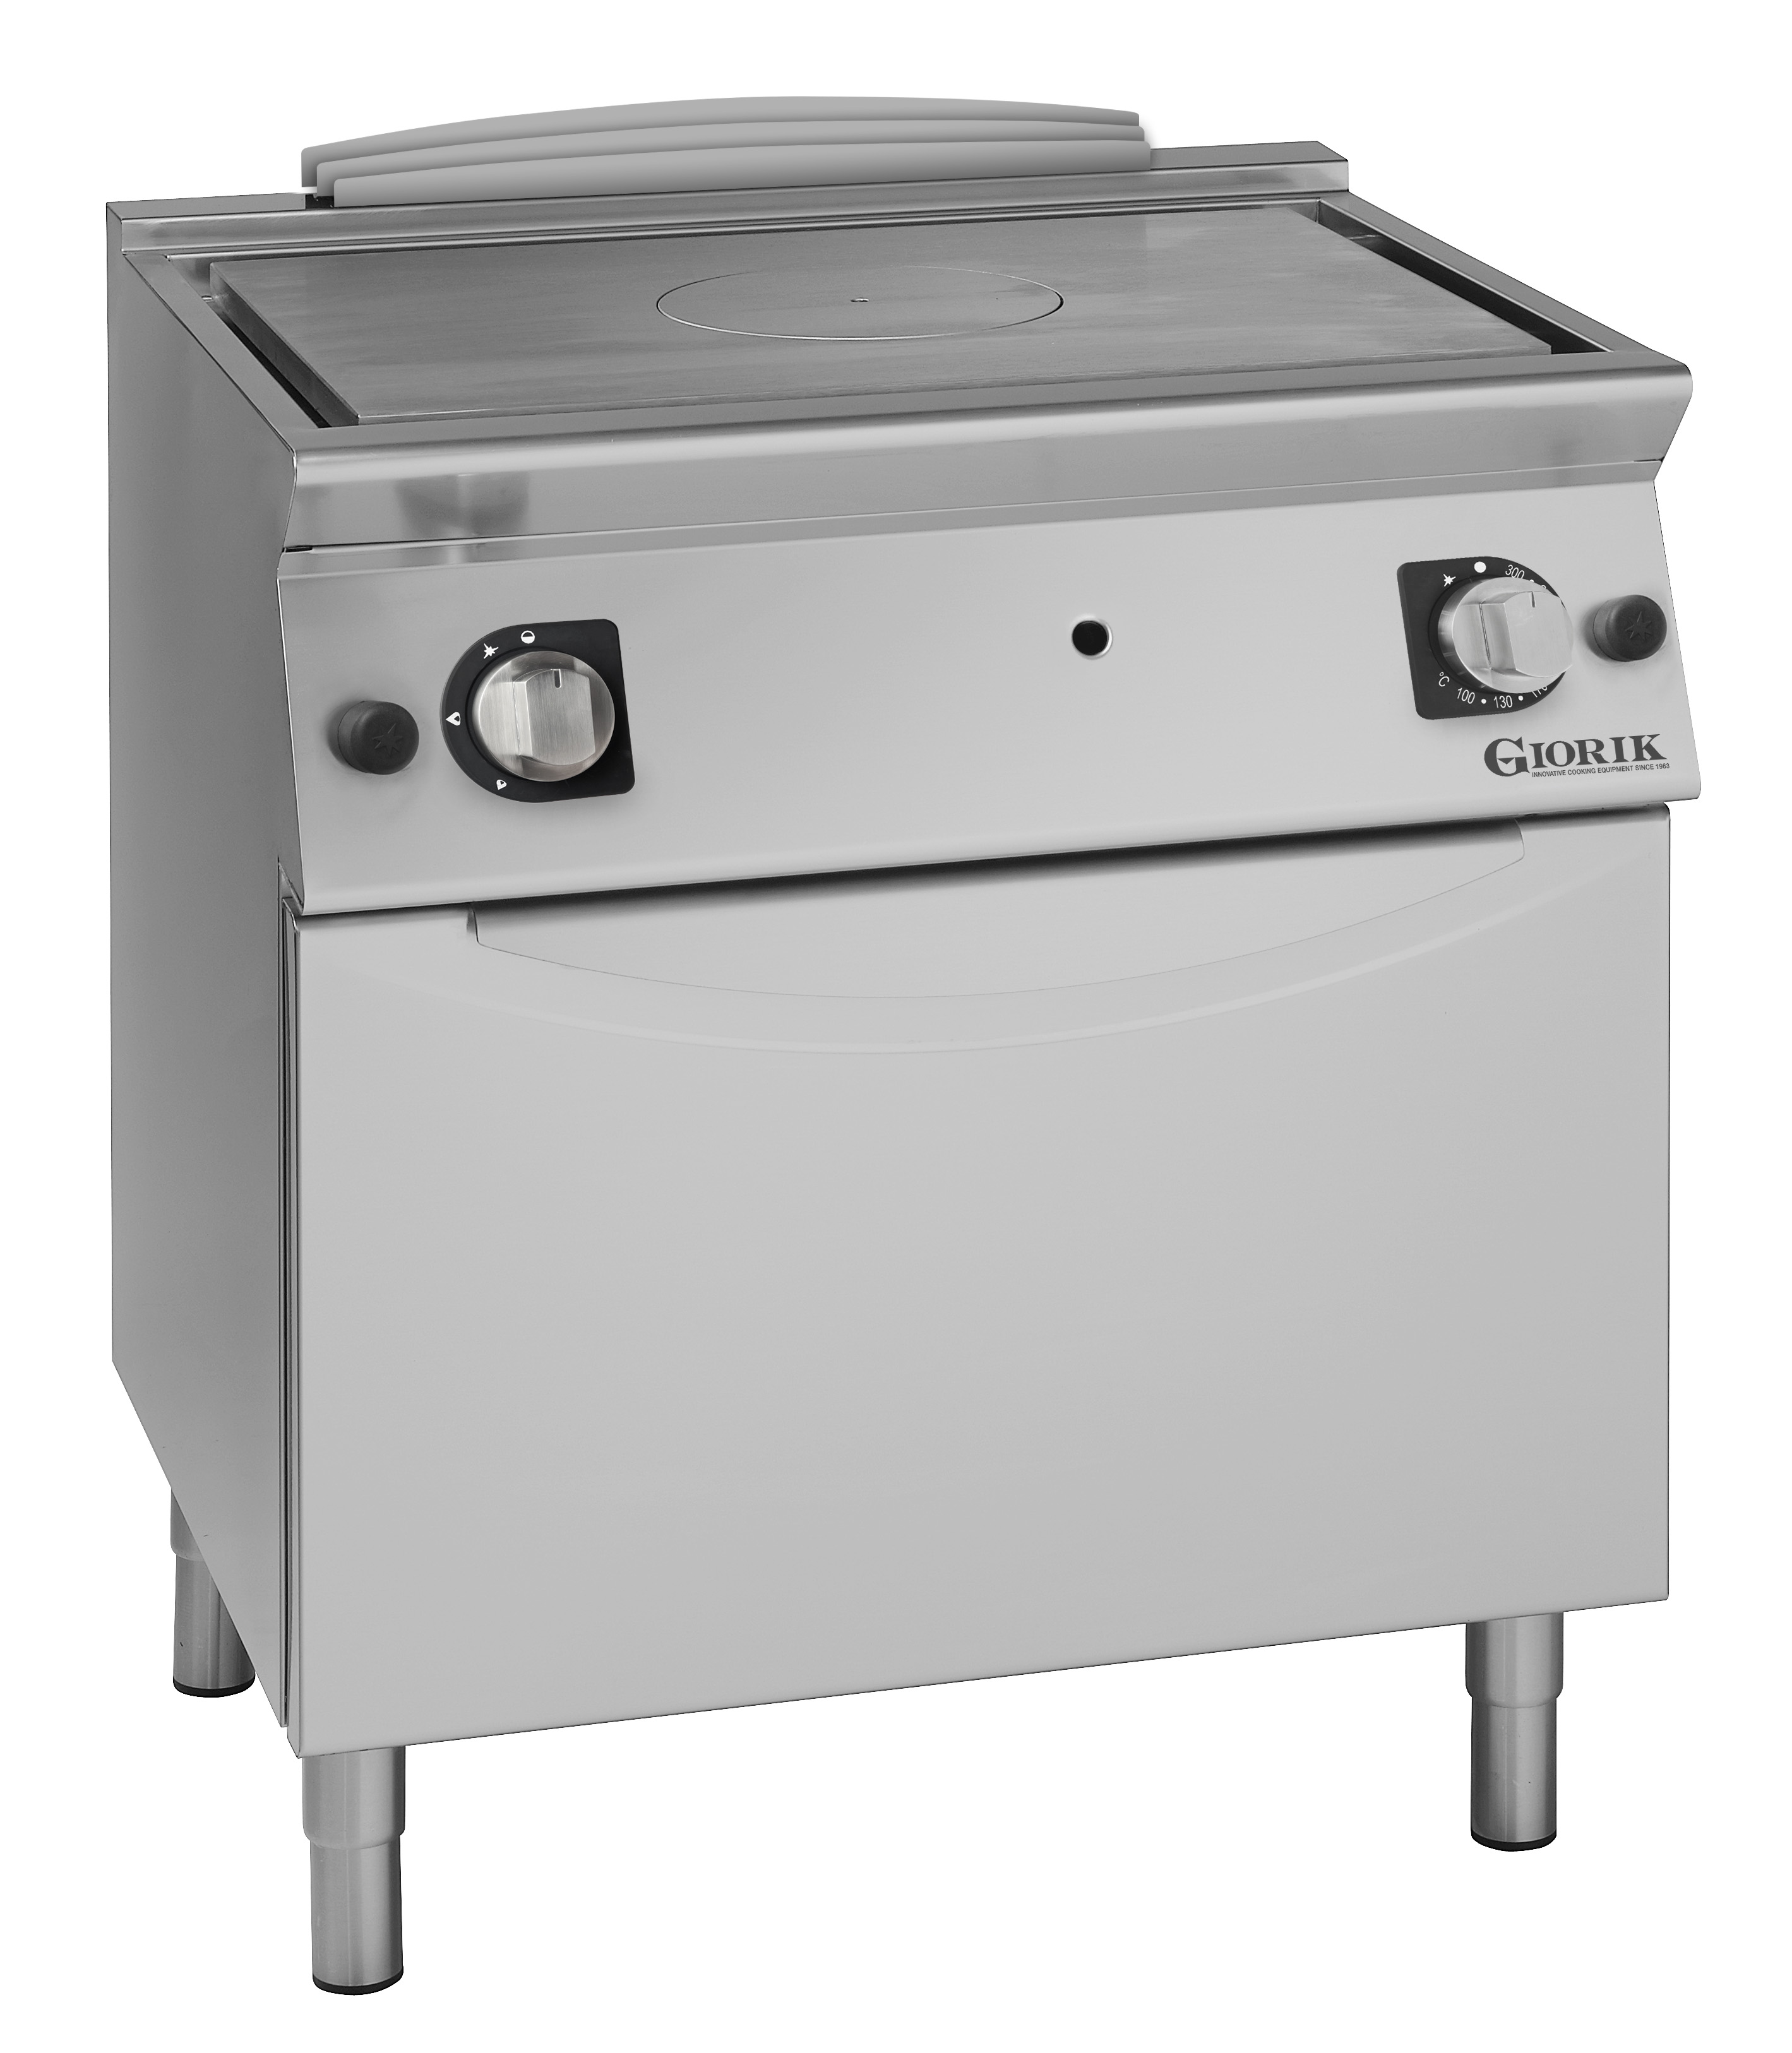 GAS SOLID TOP ON GAS OVEN